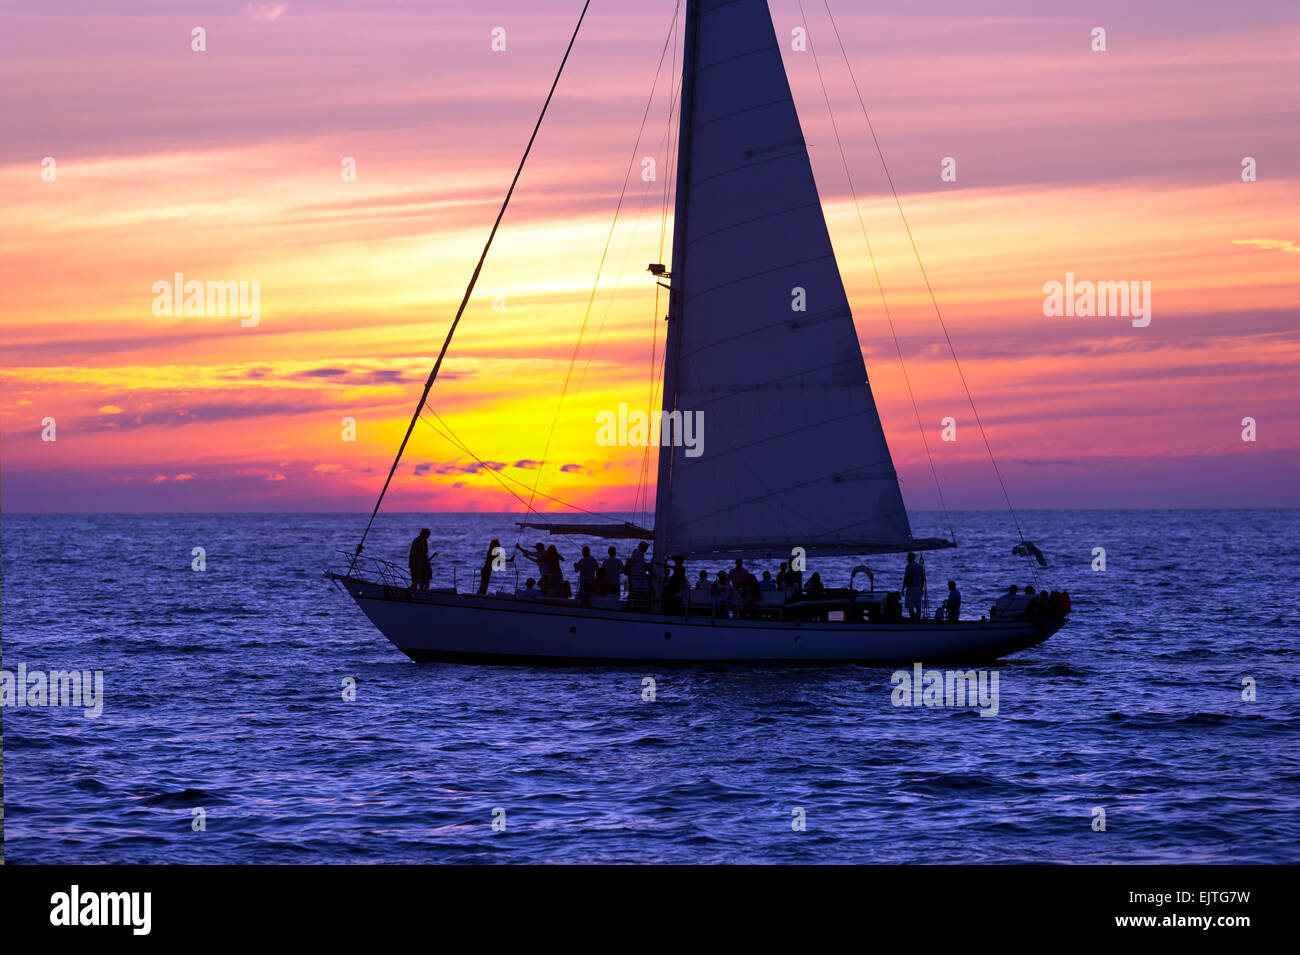 A Sailboat full of party people on vacation sails along the ocean as the sun sets in the background Stock Photo